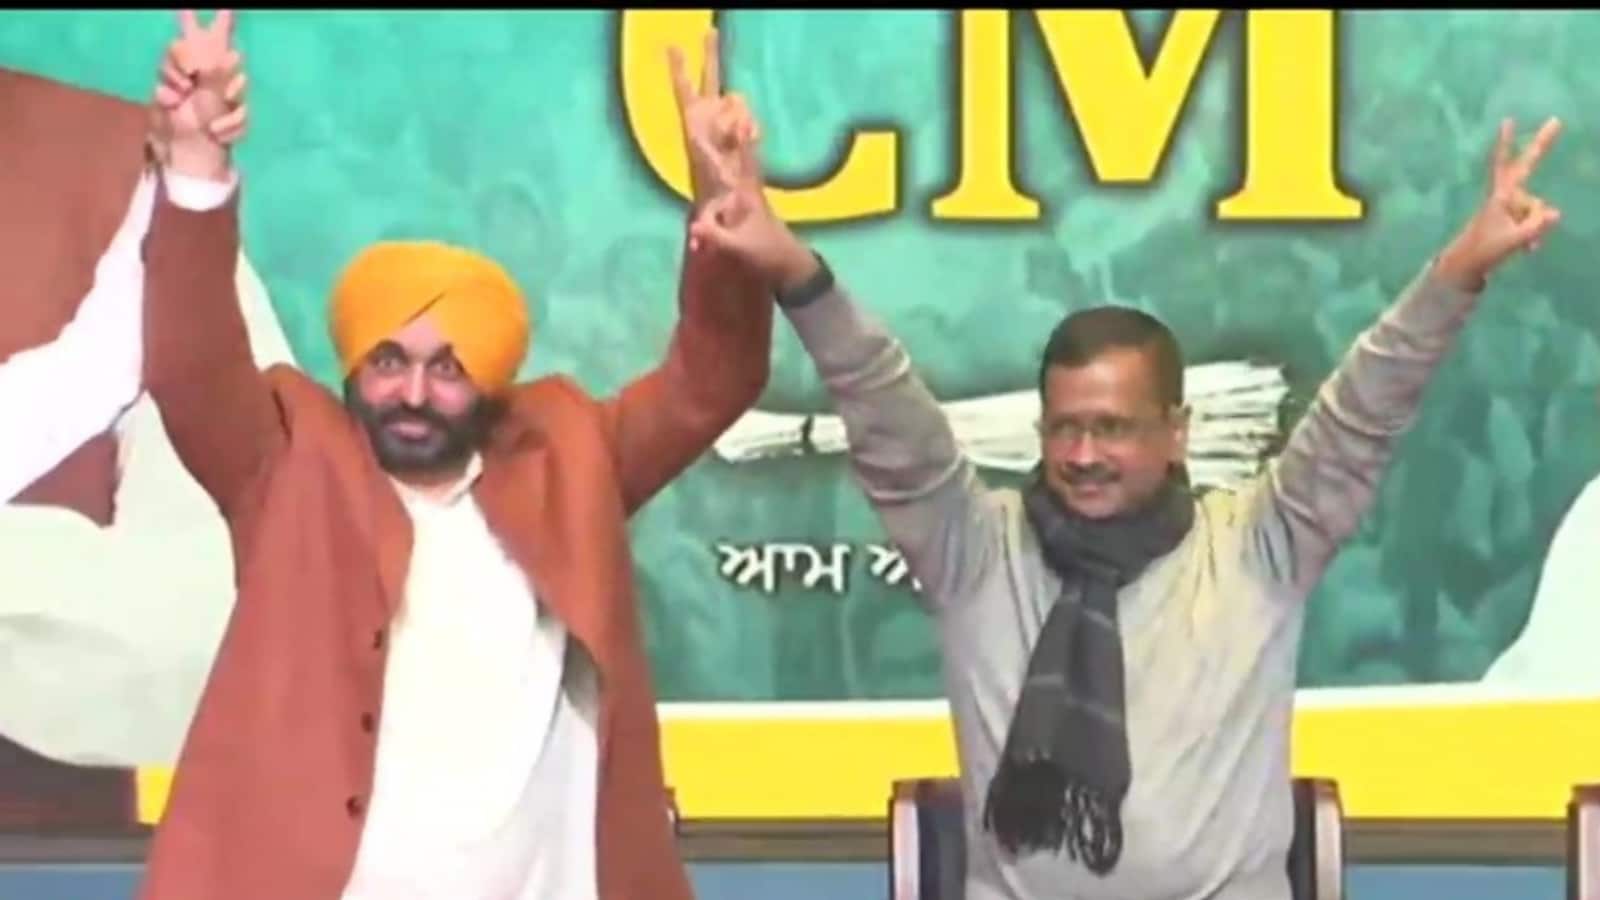 Punjab Polls: Kejriwal and I are a Twosome, Biggest Challenge is Revival of the State, Says Bhagwant Mann